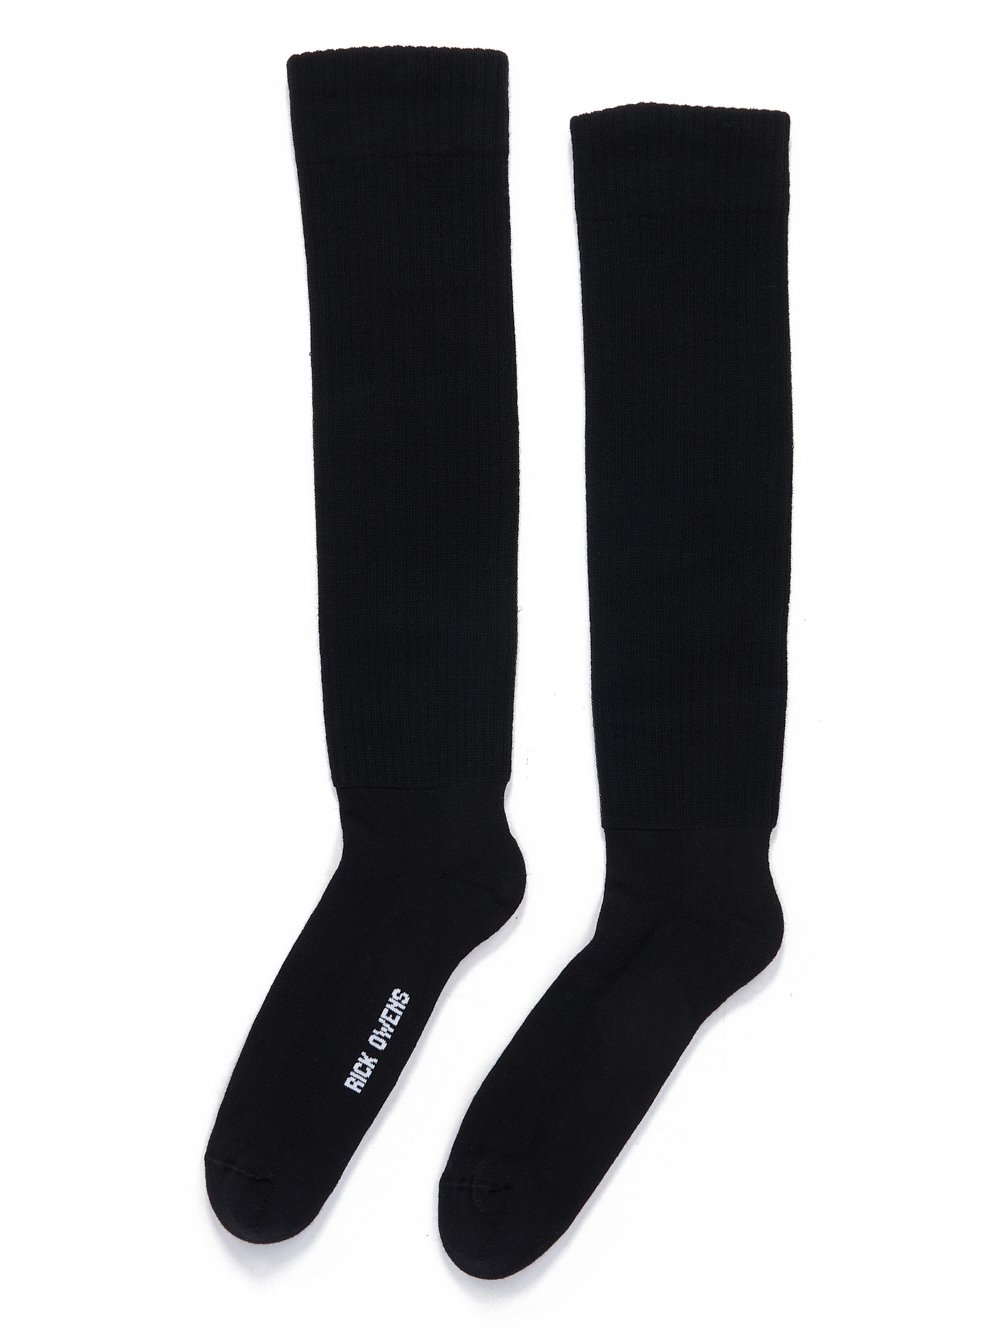 RICK OWENS FW23 LUXOR KNEE HIGH SOCKS IN BLACK AND MILK COTTON KNIT